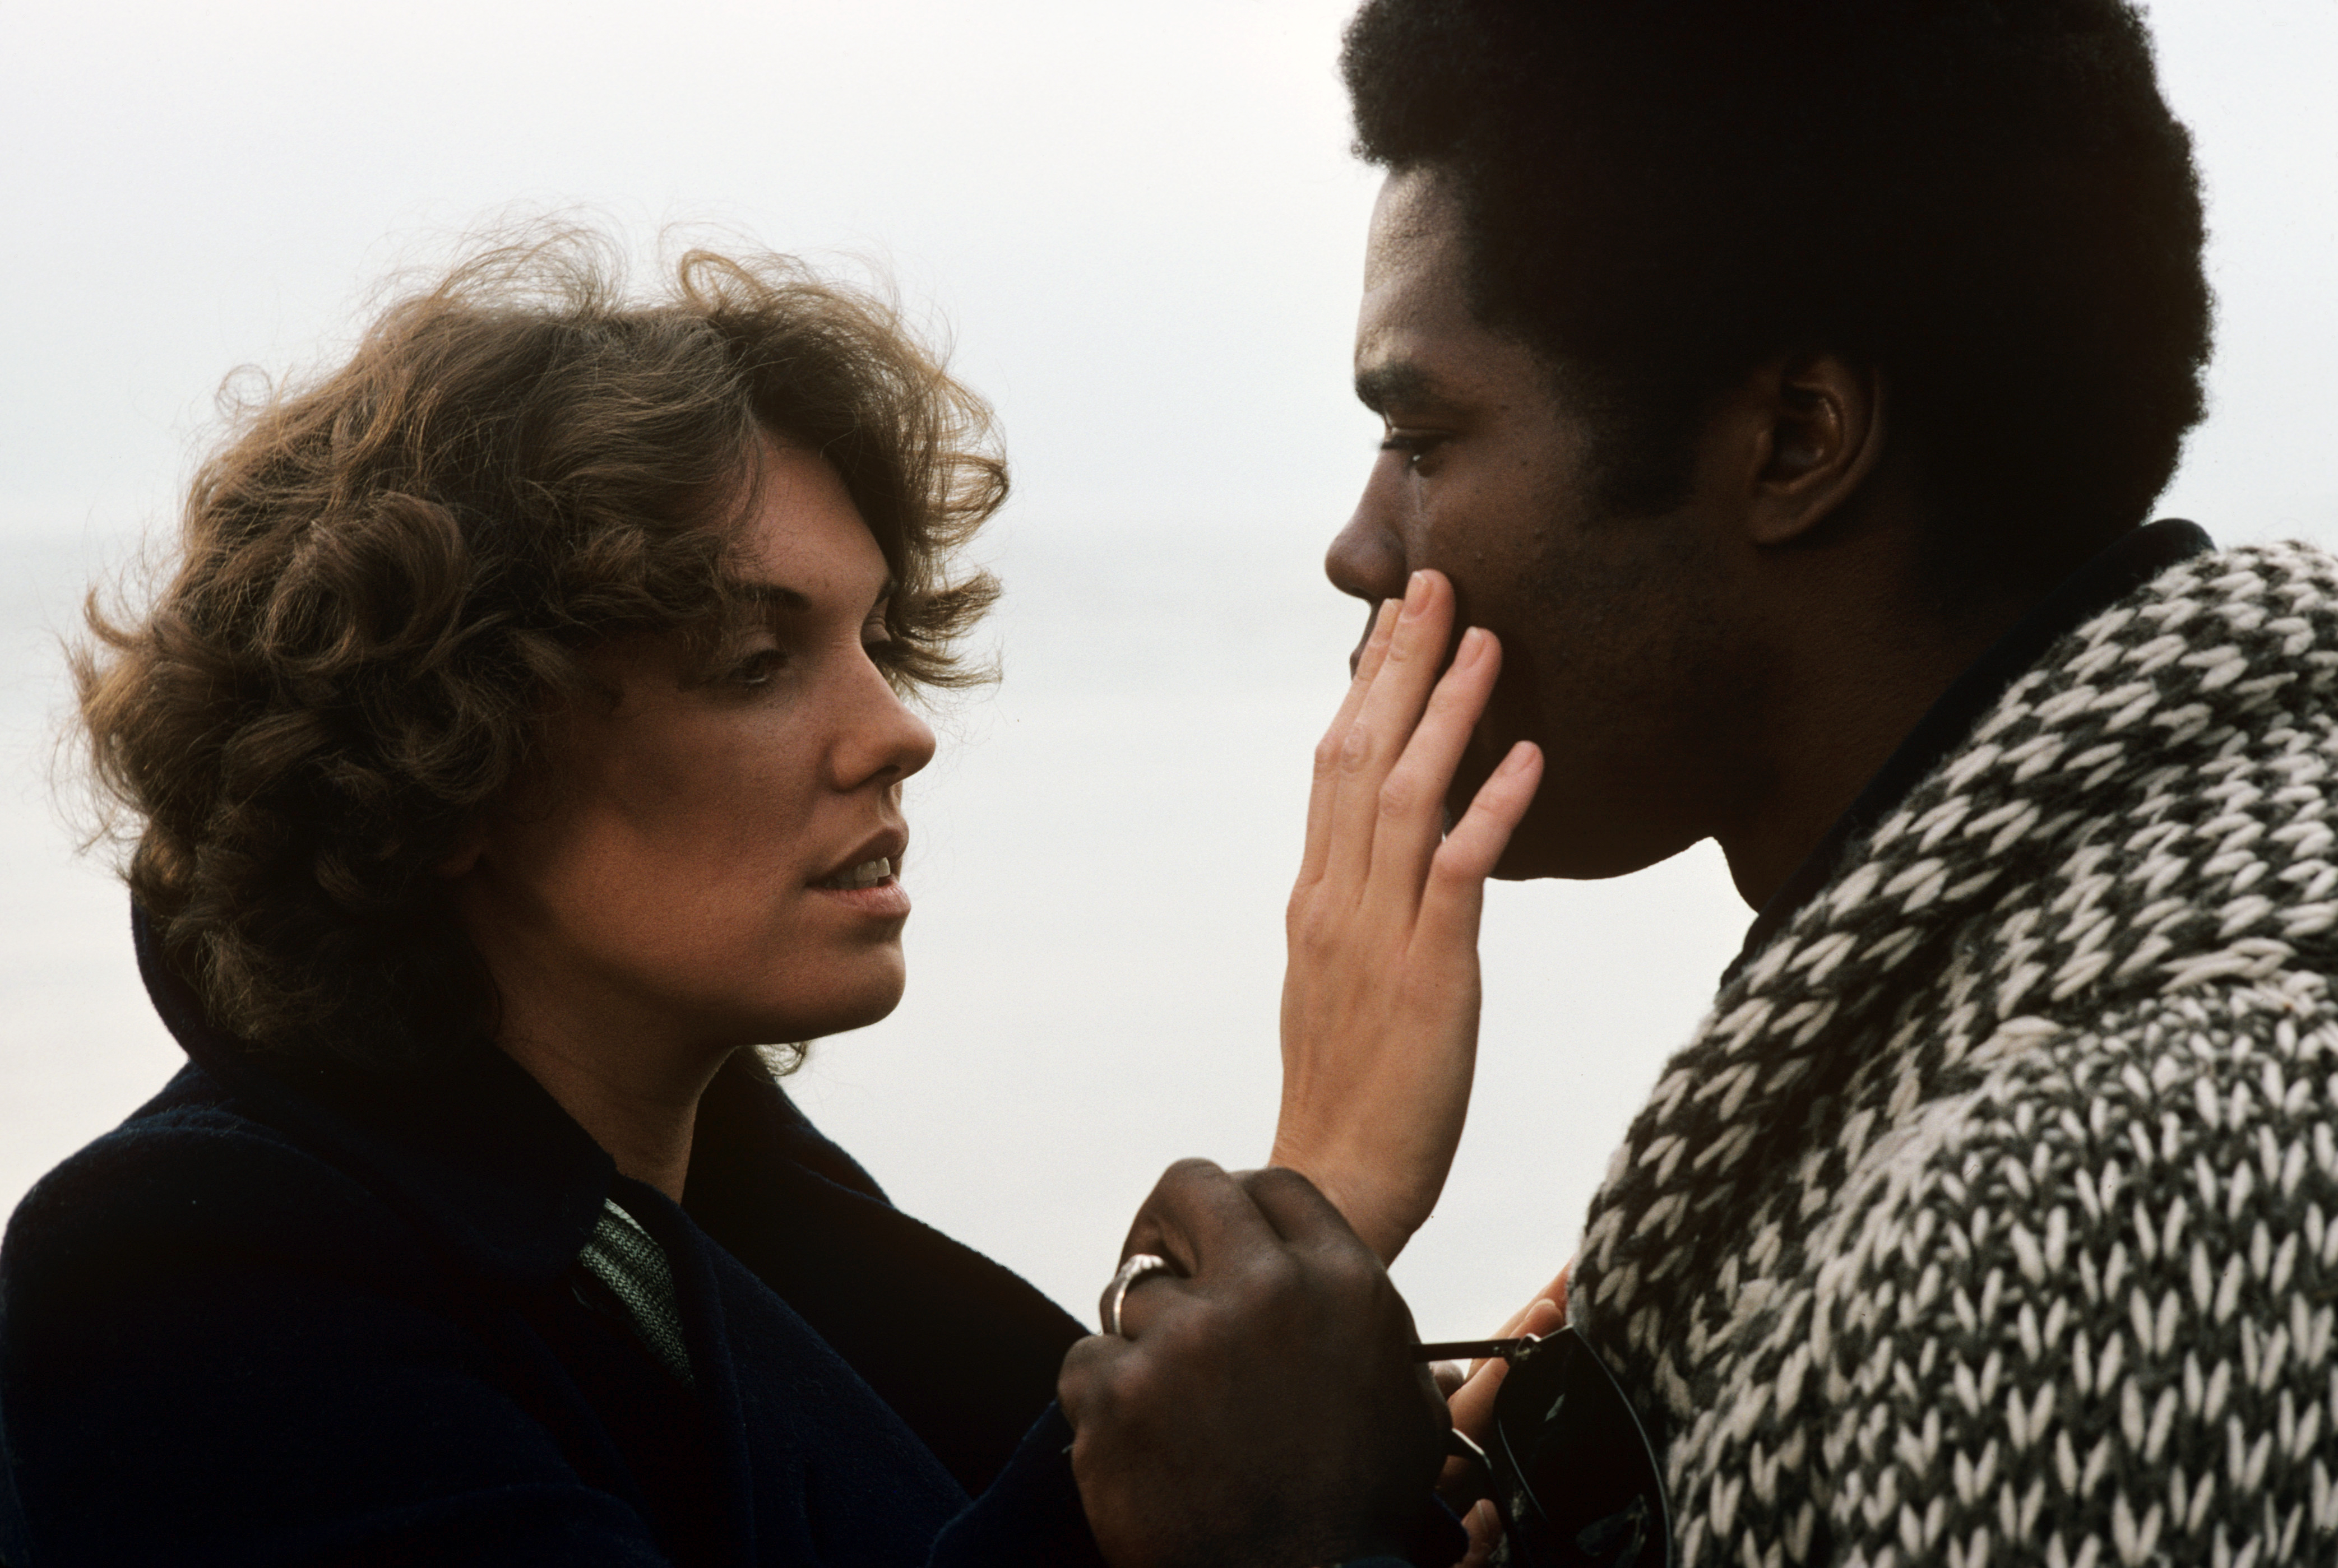 Tyne Daly and Georg Stanford Brown on an episode of "The Rookies" on January 20, 1976 | Source: Getty Images